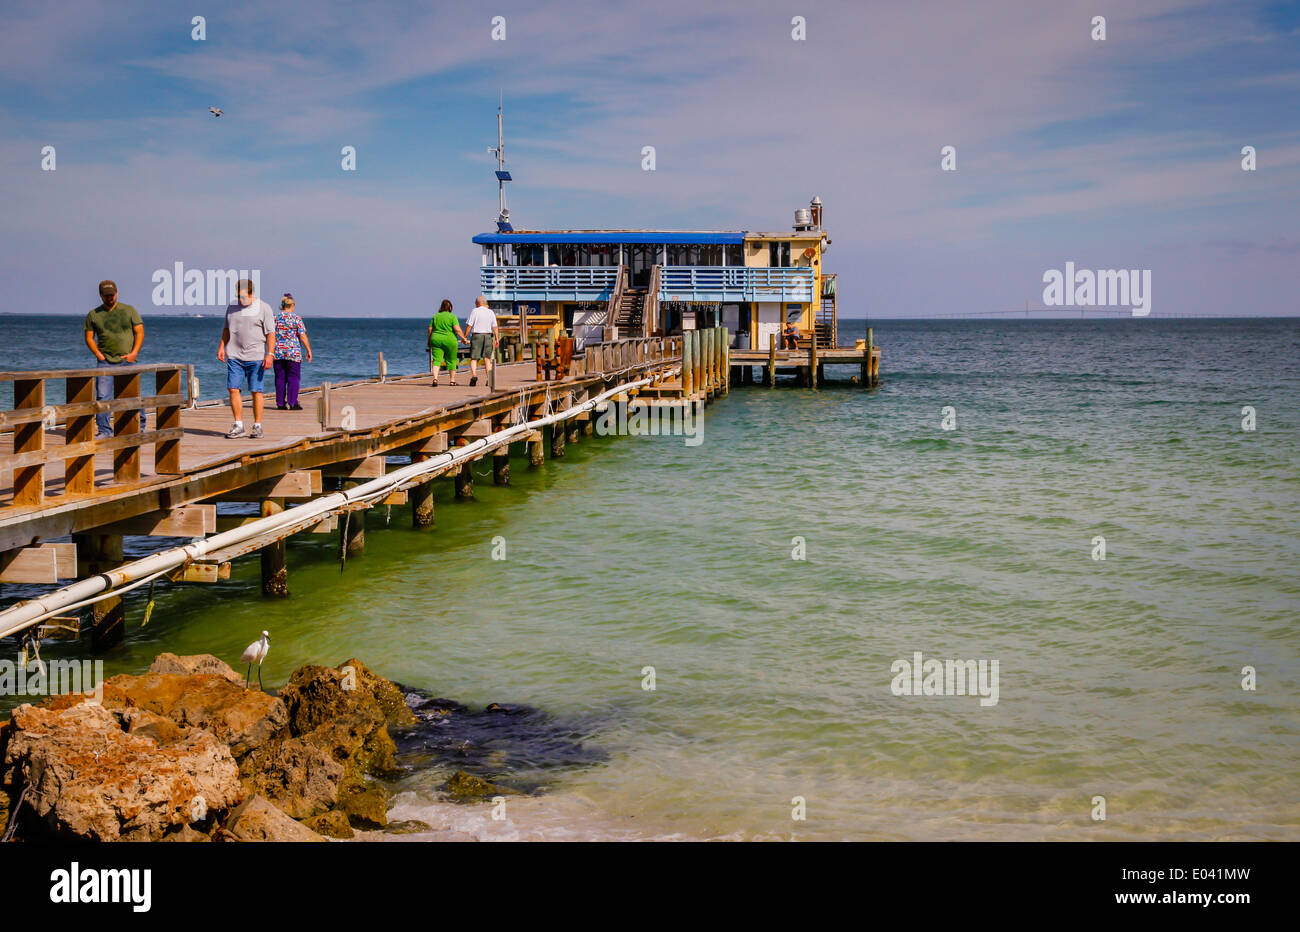 The Rod & Reel Pier on Anna Maria Island, FL surrounded by the Gulf of Mexico Stock Photo